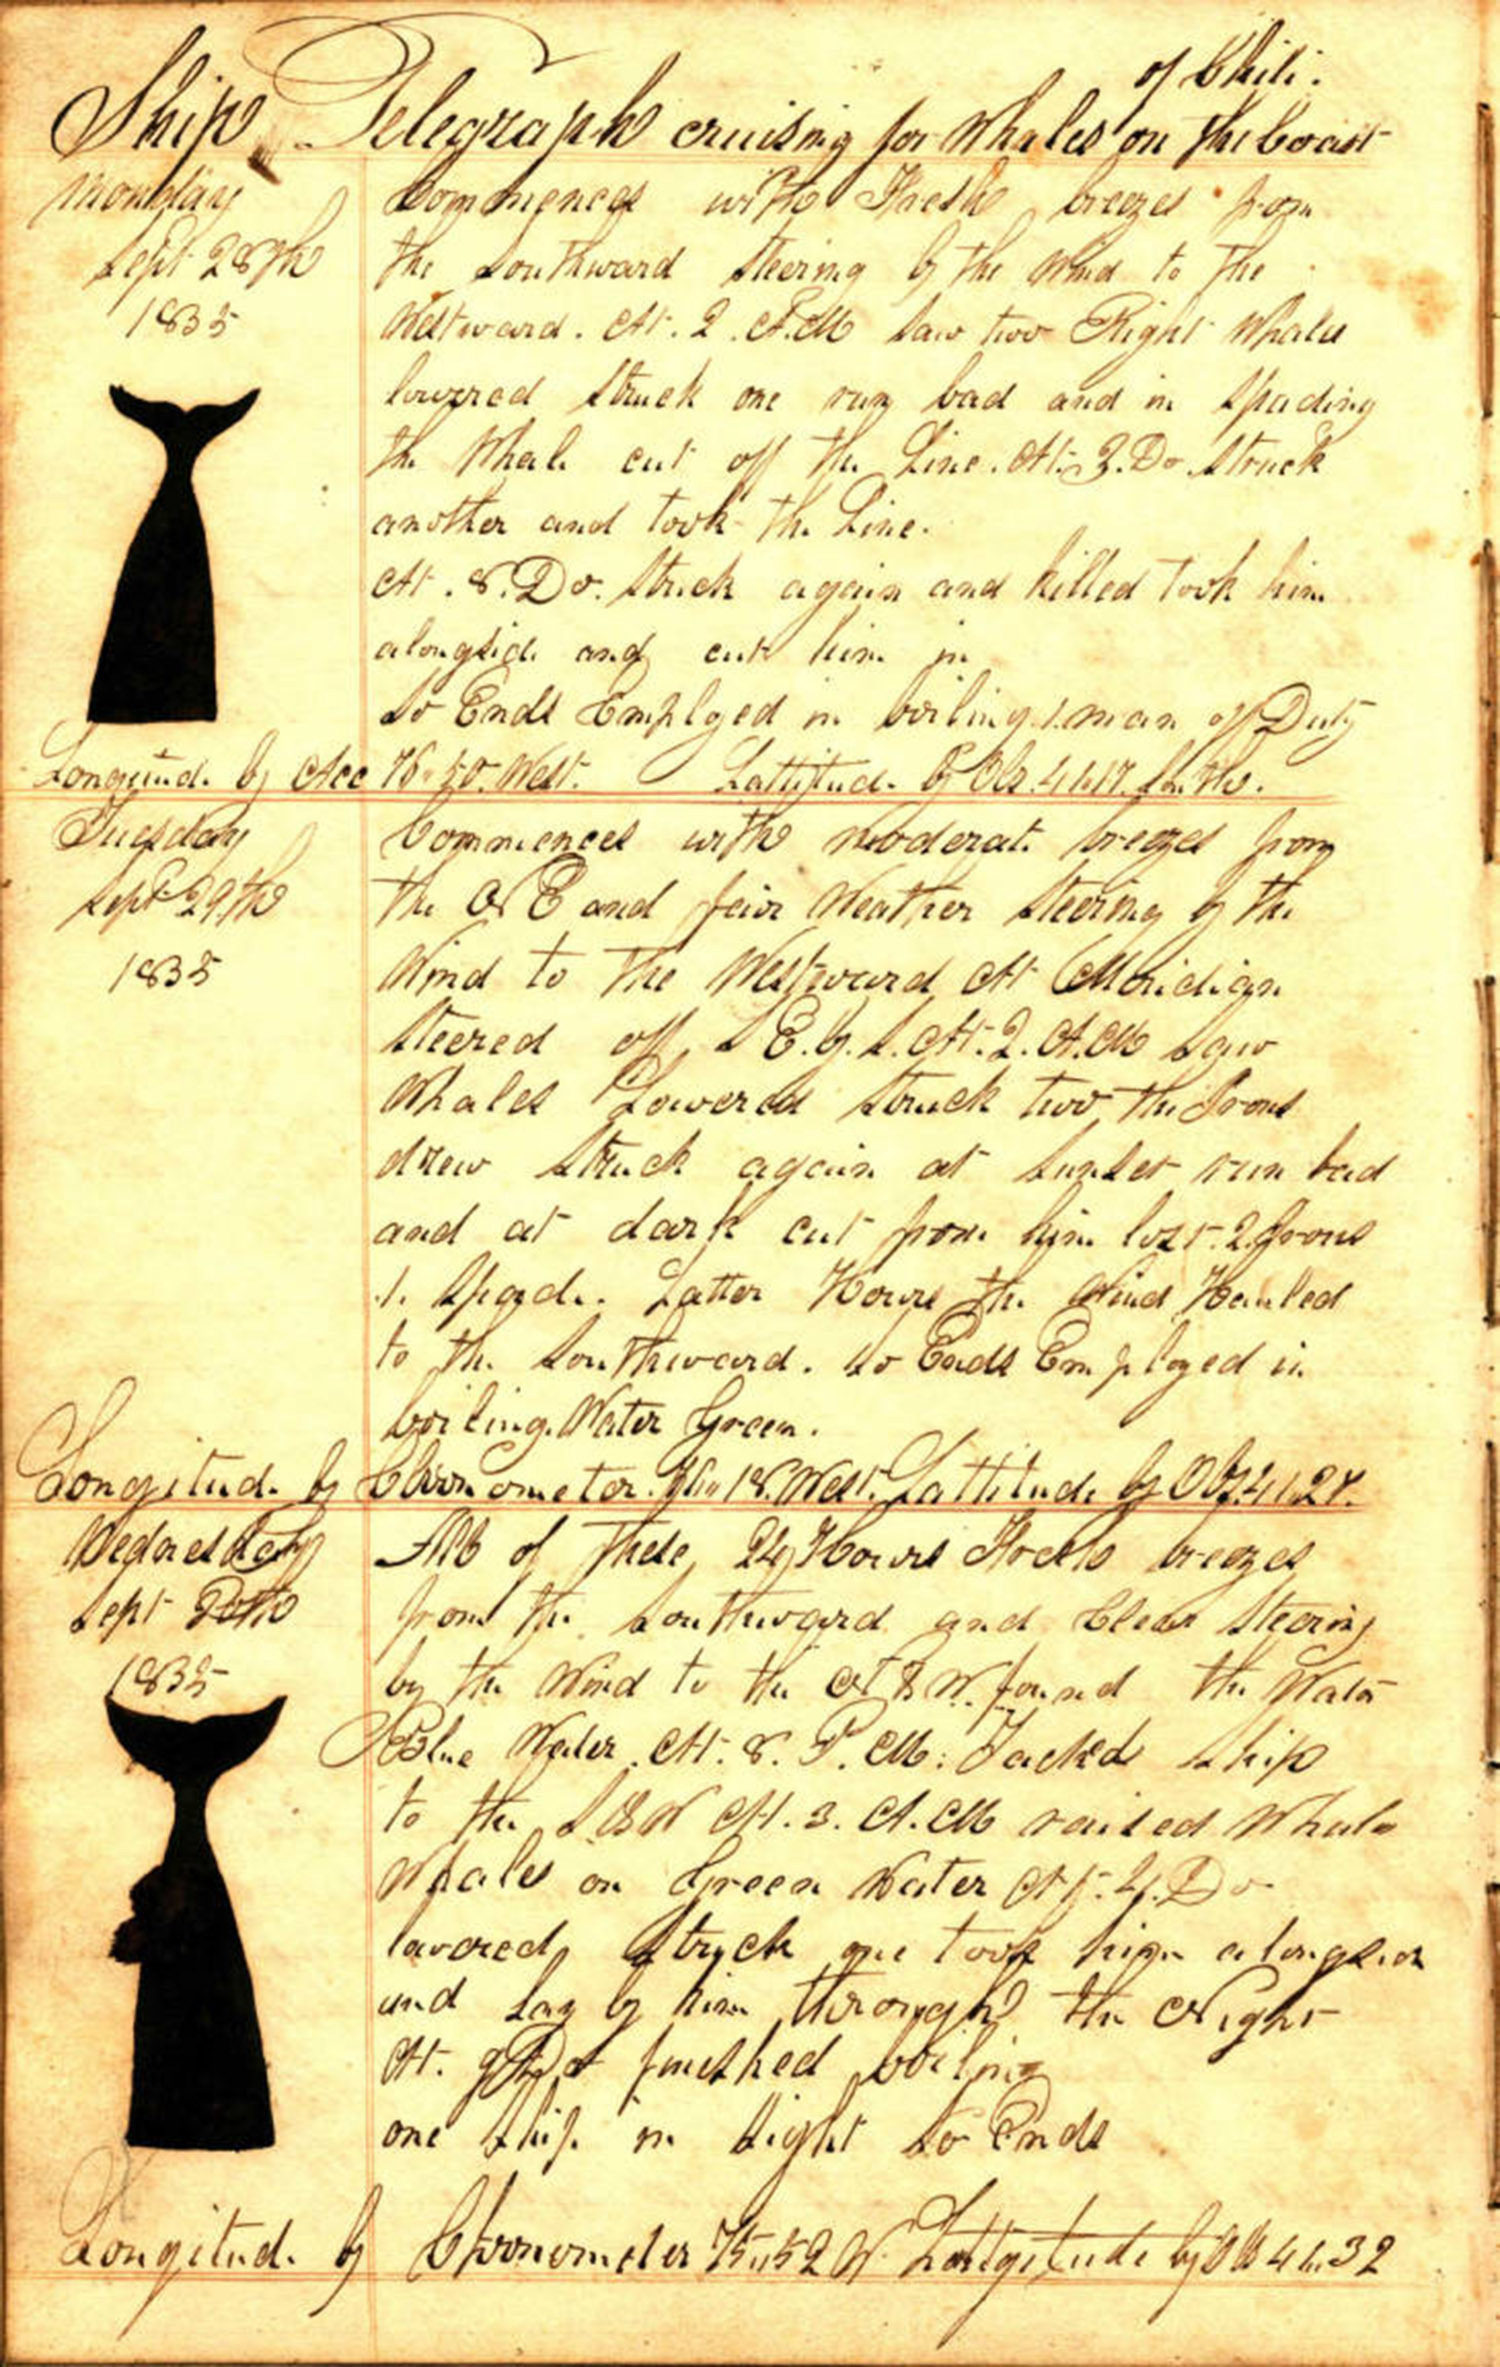 A page taken from the whaling ship Telegraph, on a voyage from Sag Harbor to the South Atlantic Ocean and Oceania, 21 October 1834 - 21 May 1836.    COURTESY EAST HAMPTON LIBRARY, LONG ISLAND COLLECTION